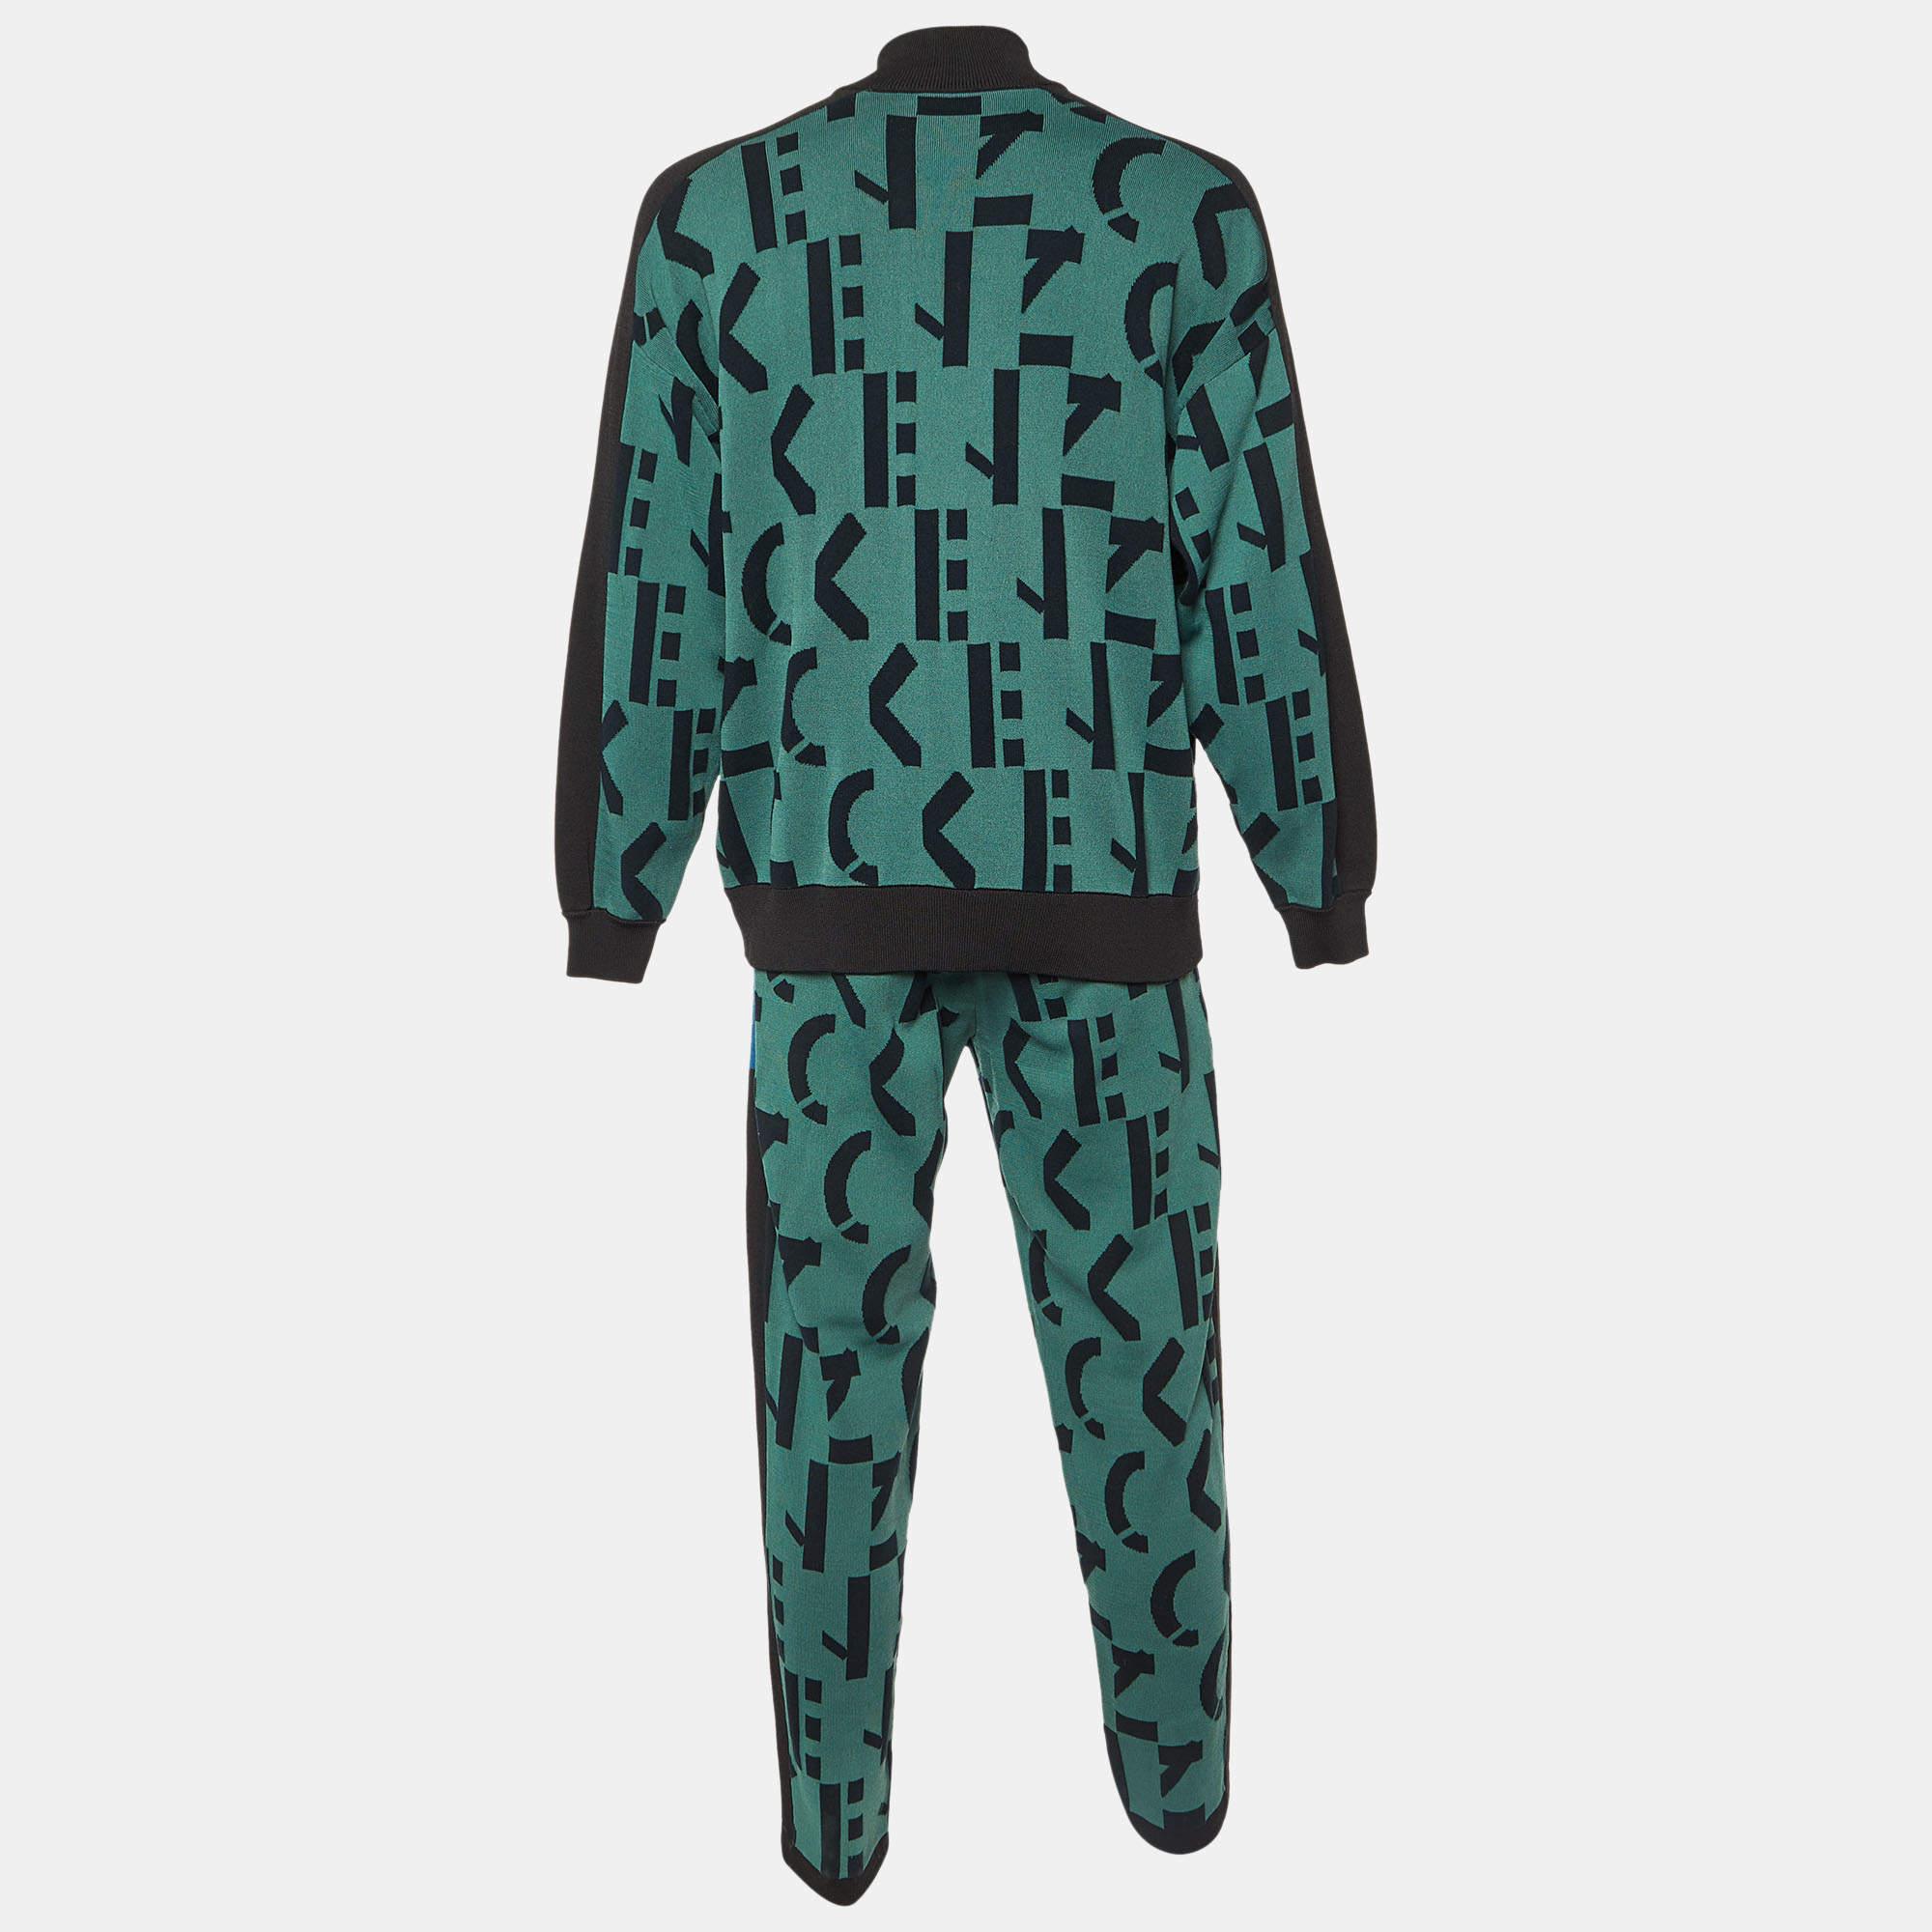 The Kenzo suit set embodies casual luxury with its soft knit fabric and vibrant green hue. Featuring the iconic Kenzo logo prominently displayed, this set offers both comfort and style for leisurely days or active pursuits.

